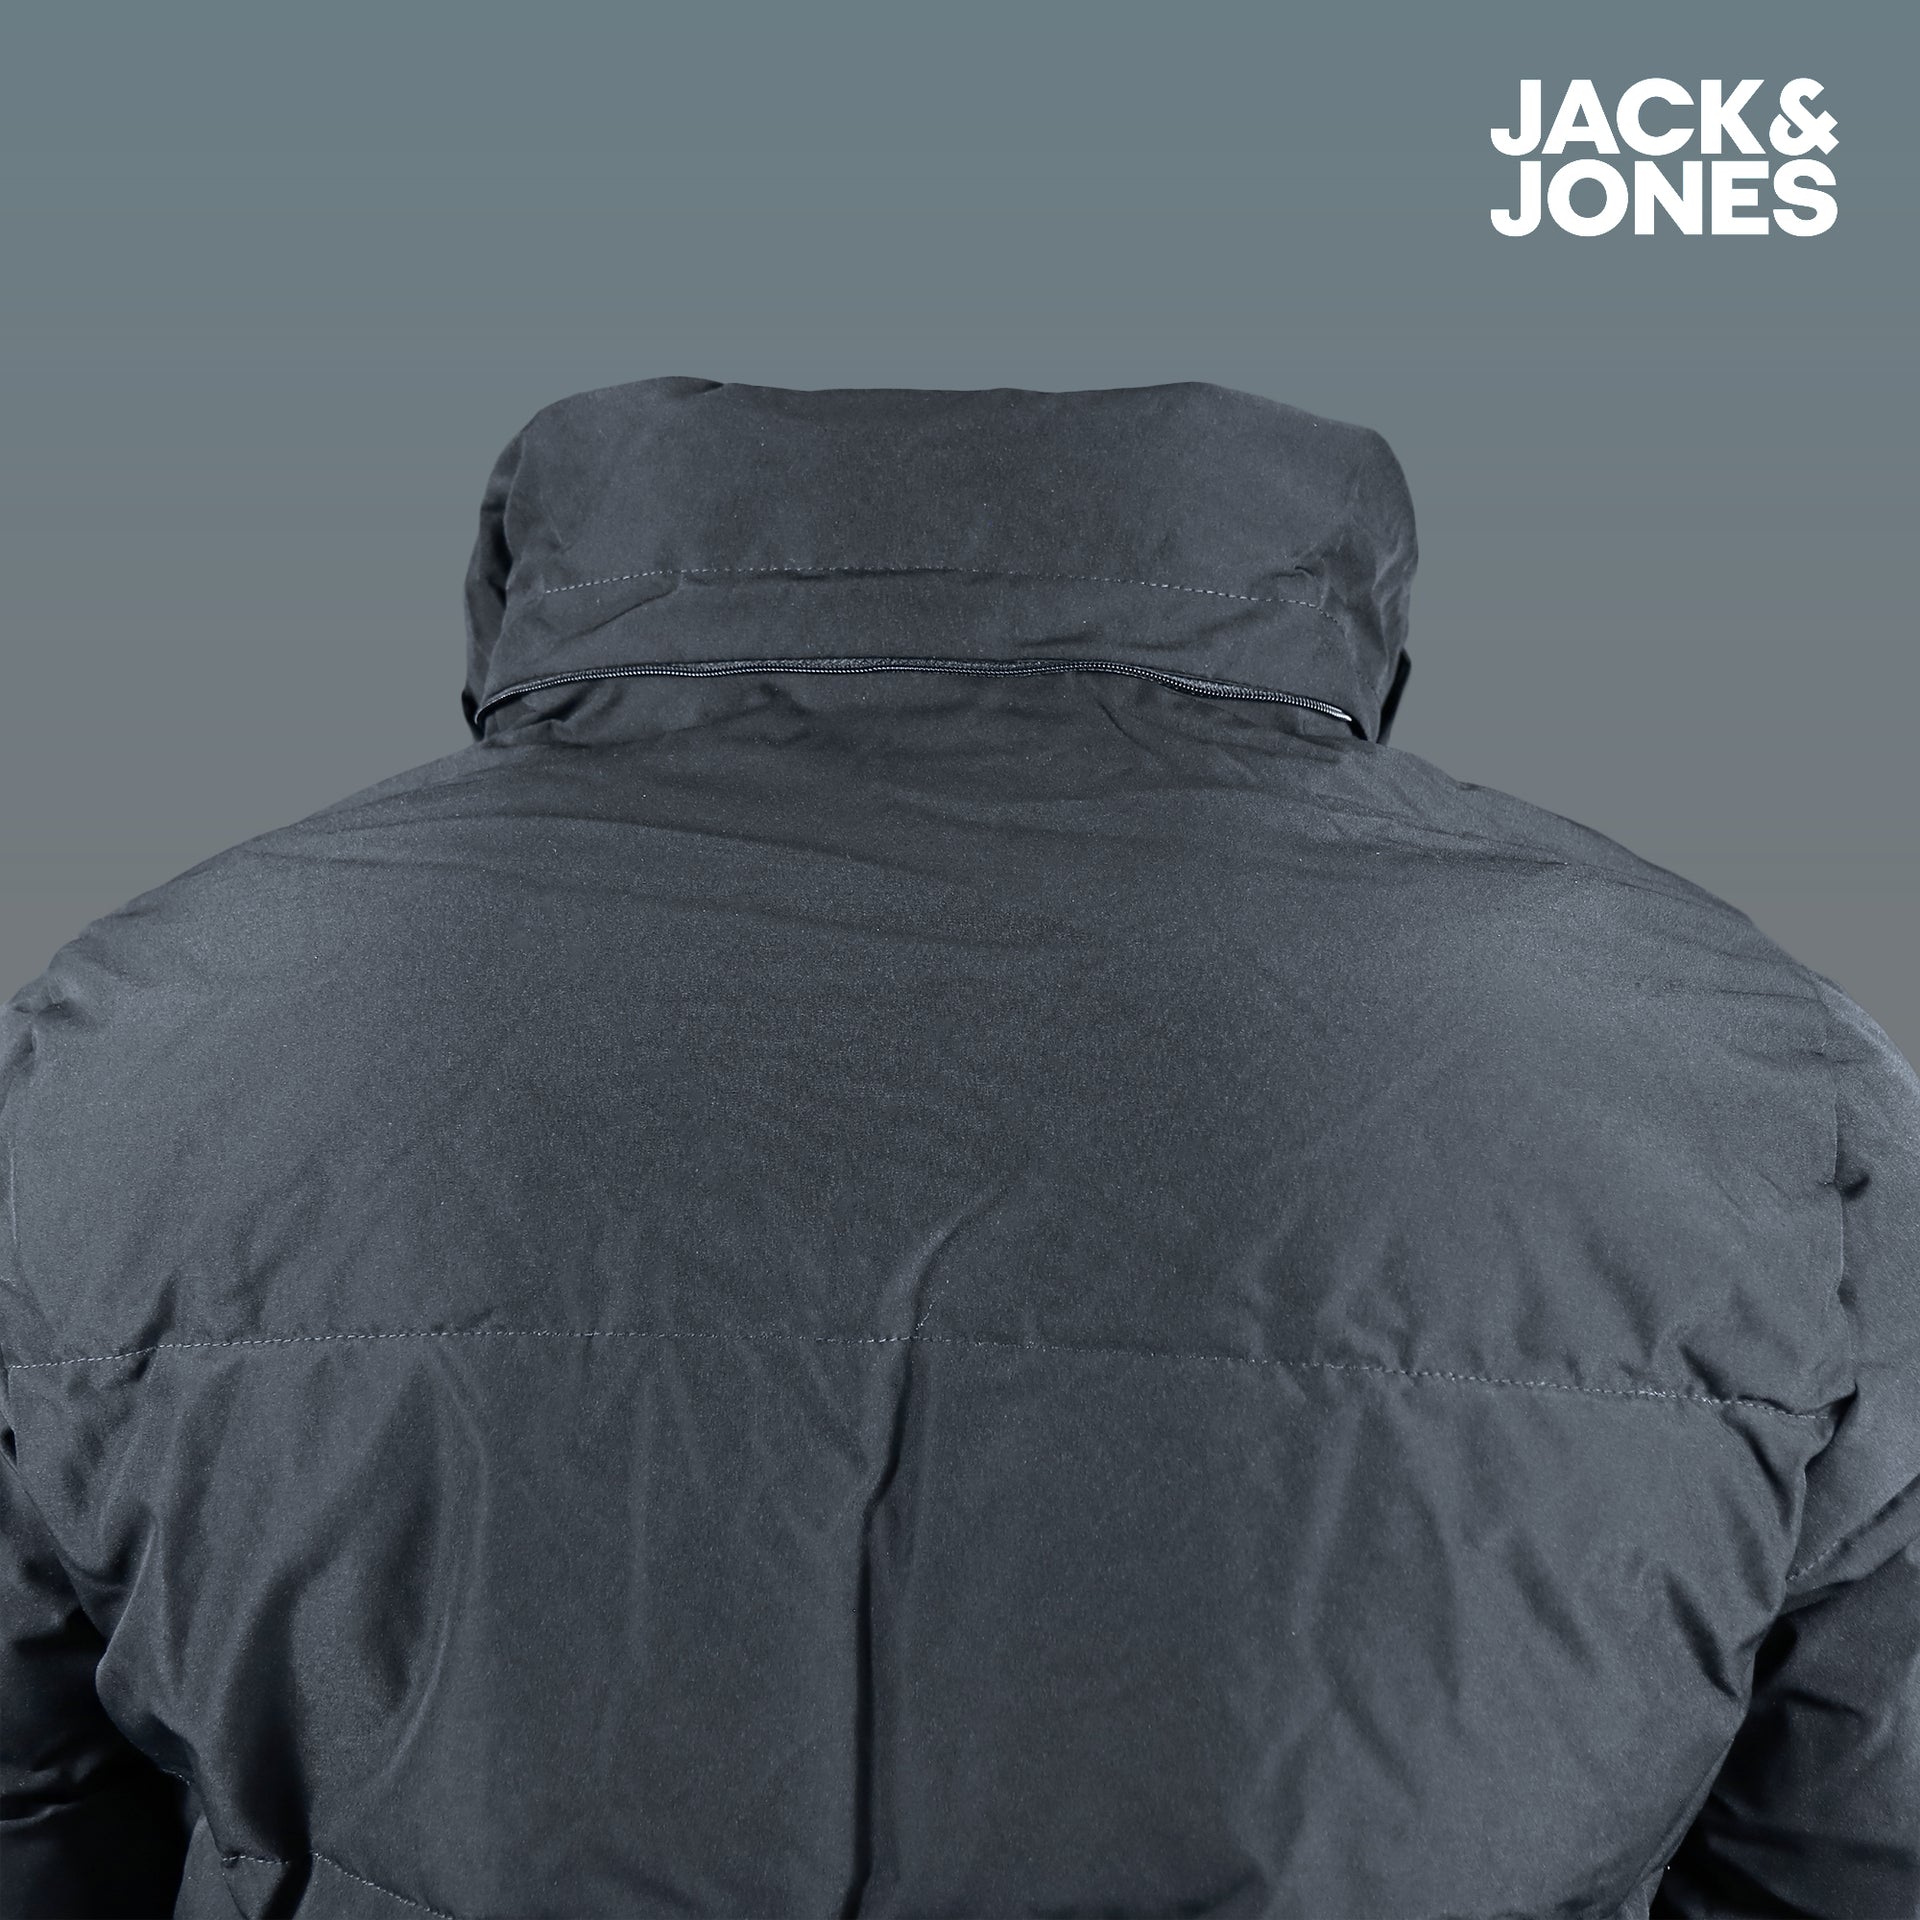 A close up of the Jack And Jones Jet Black Puffer Jacket With Hidden Pocket | Black Puffer Jacket